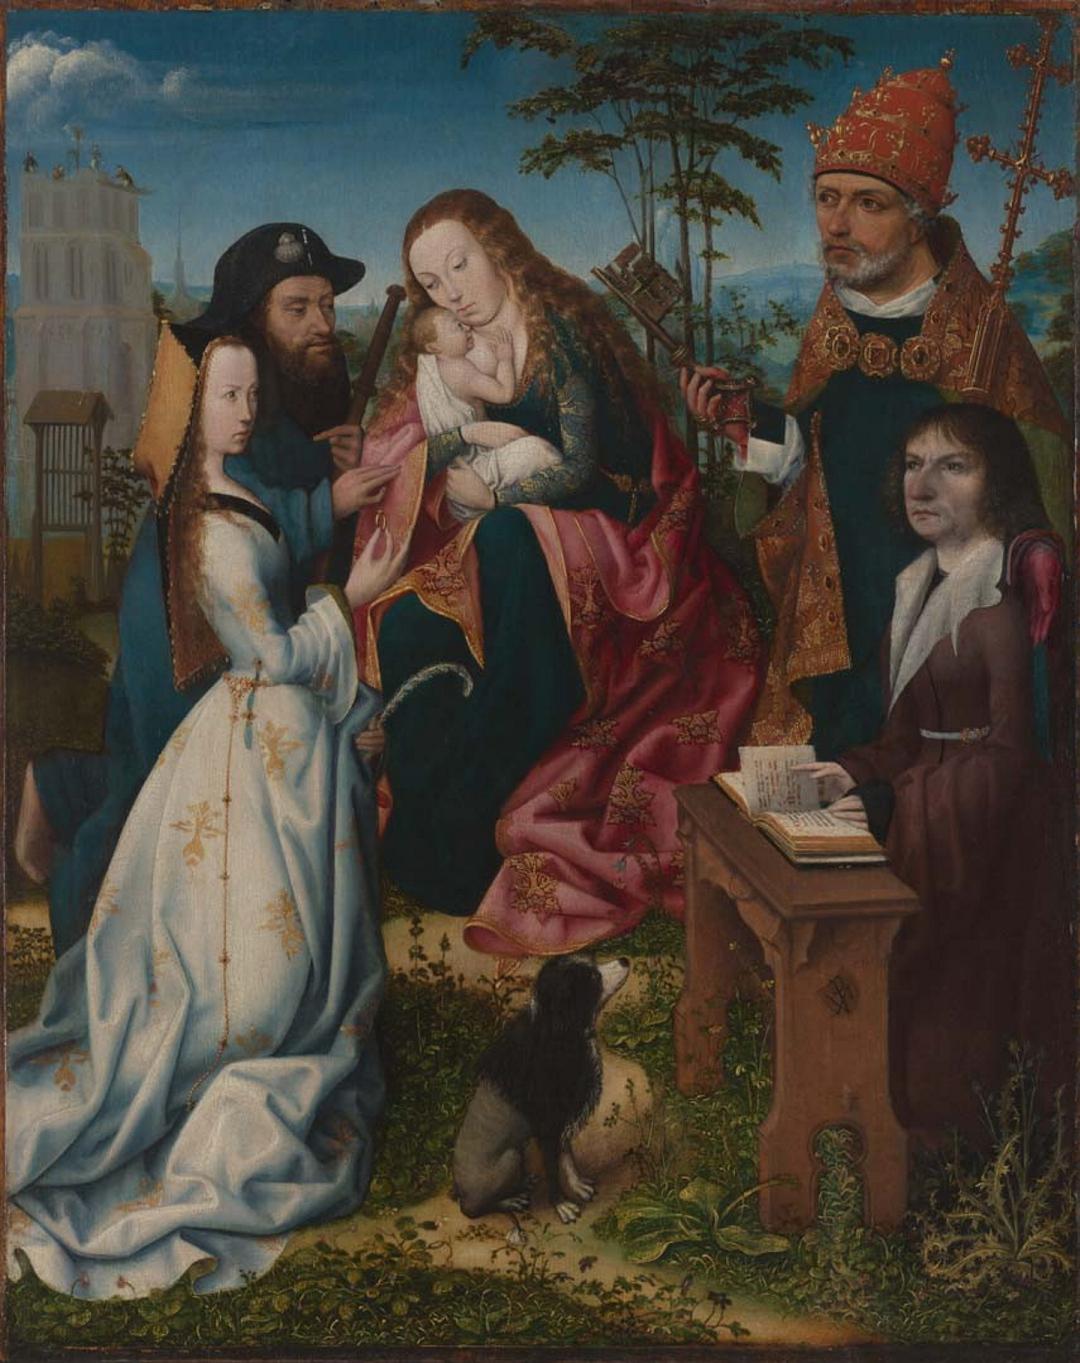 Virgin and Child with Saint James the Pilgrim, Saint Catherine and the Donor with Saint Peter c.1496